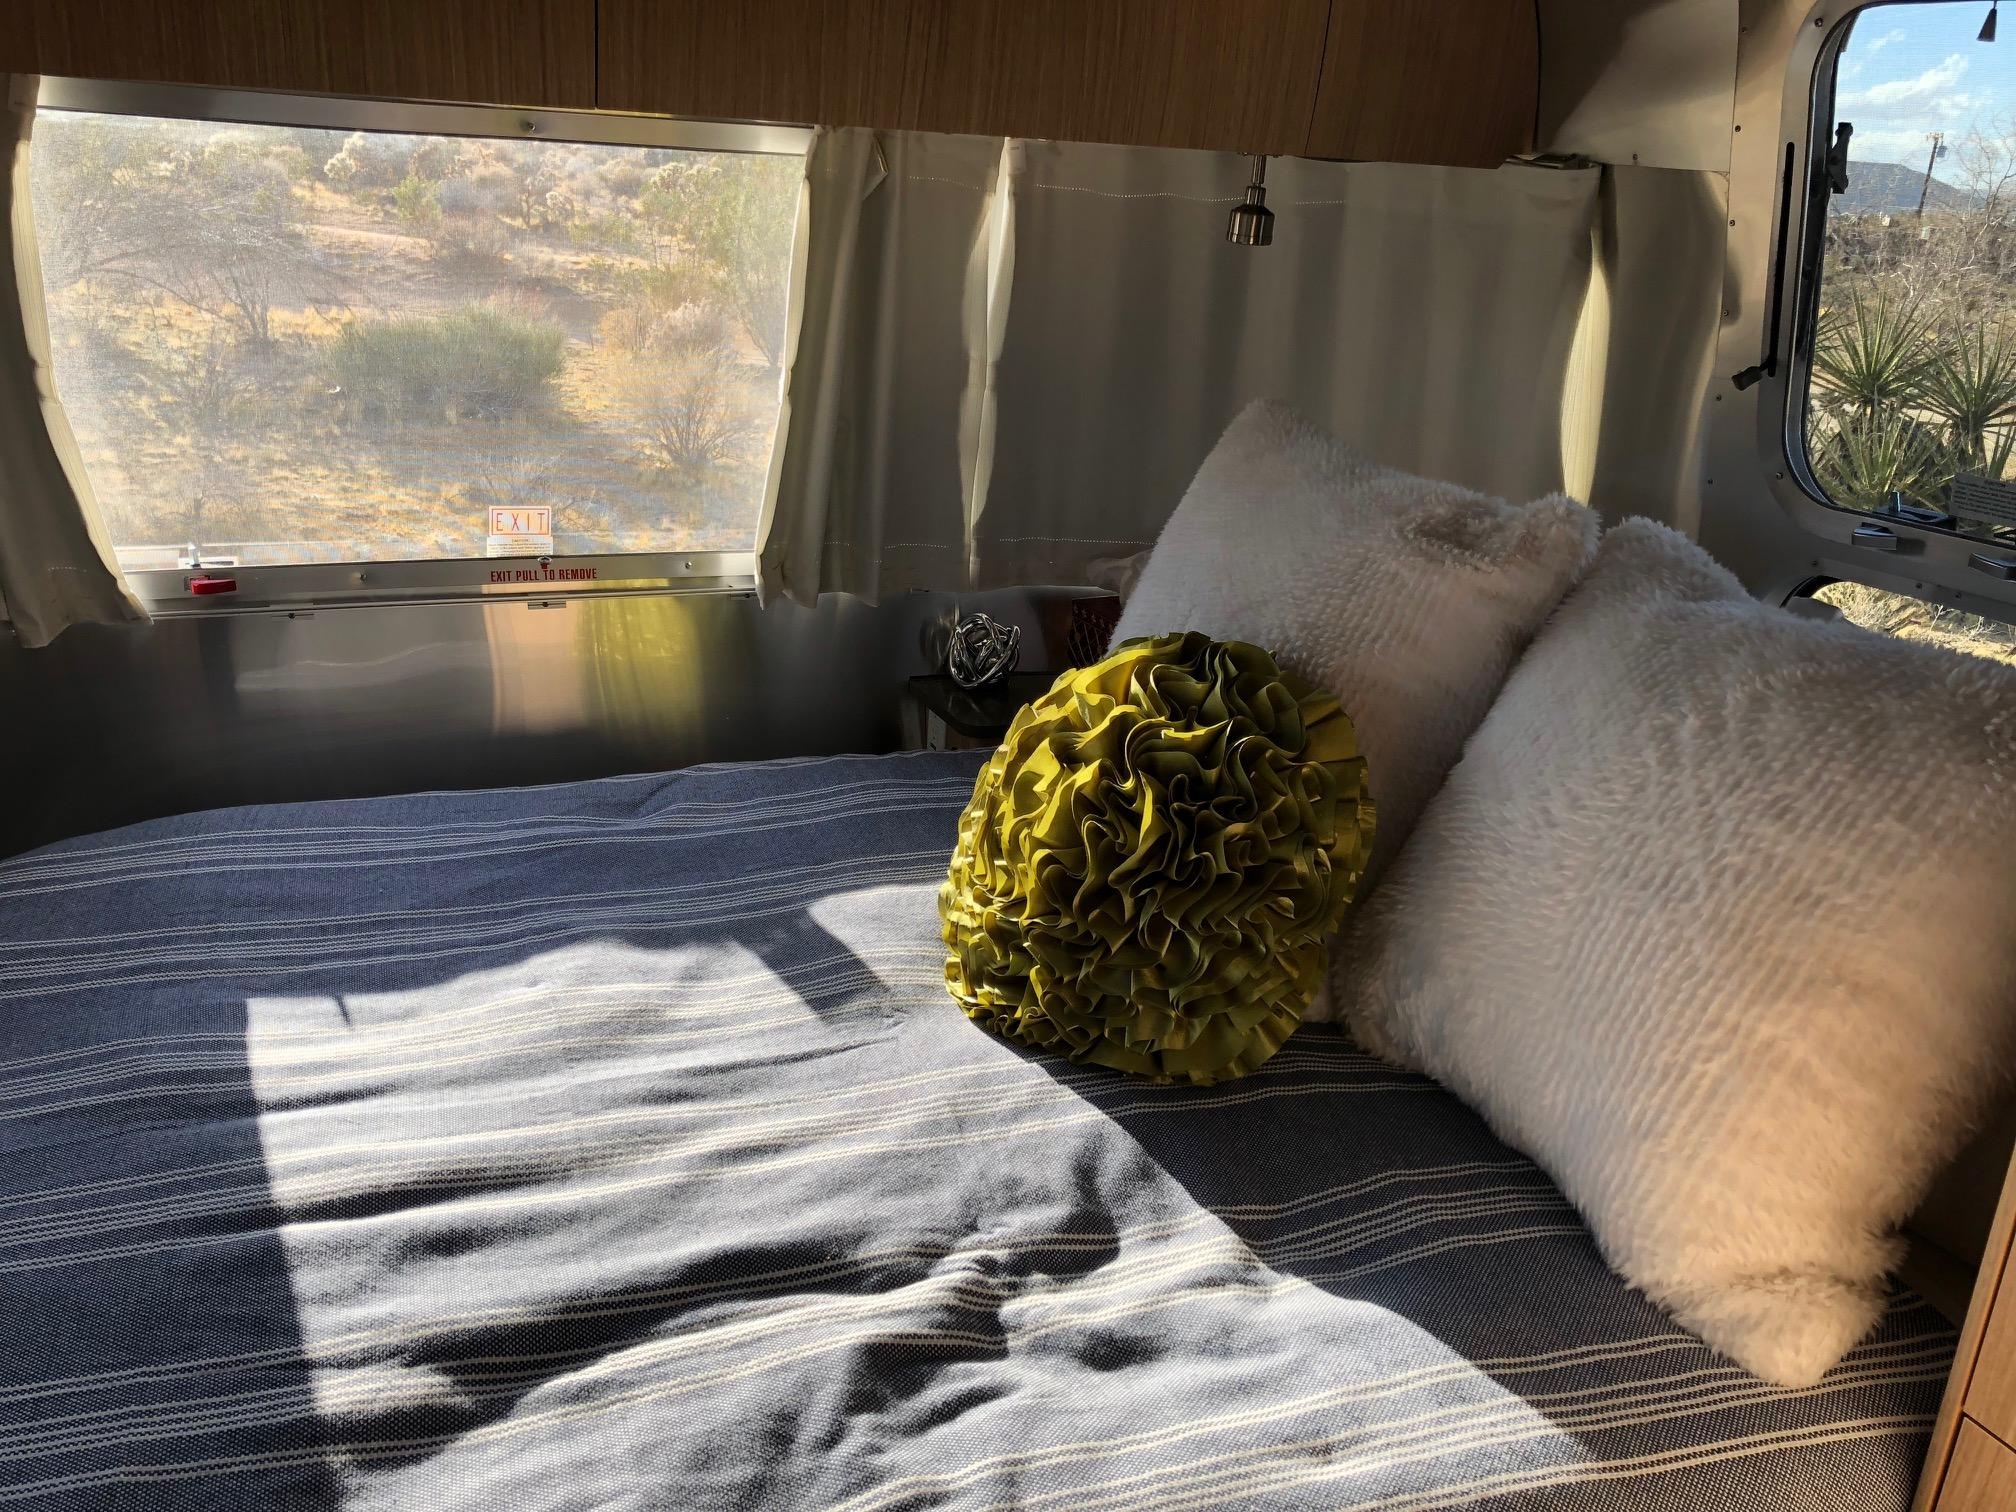 #schlafzimmer with a view #livingchallenge #airstream #bedroom #joshuatree